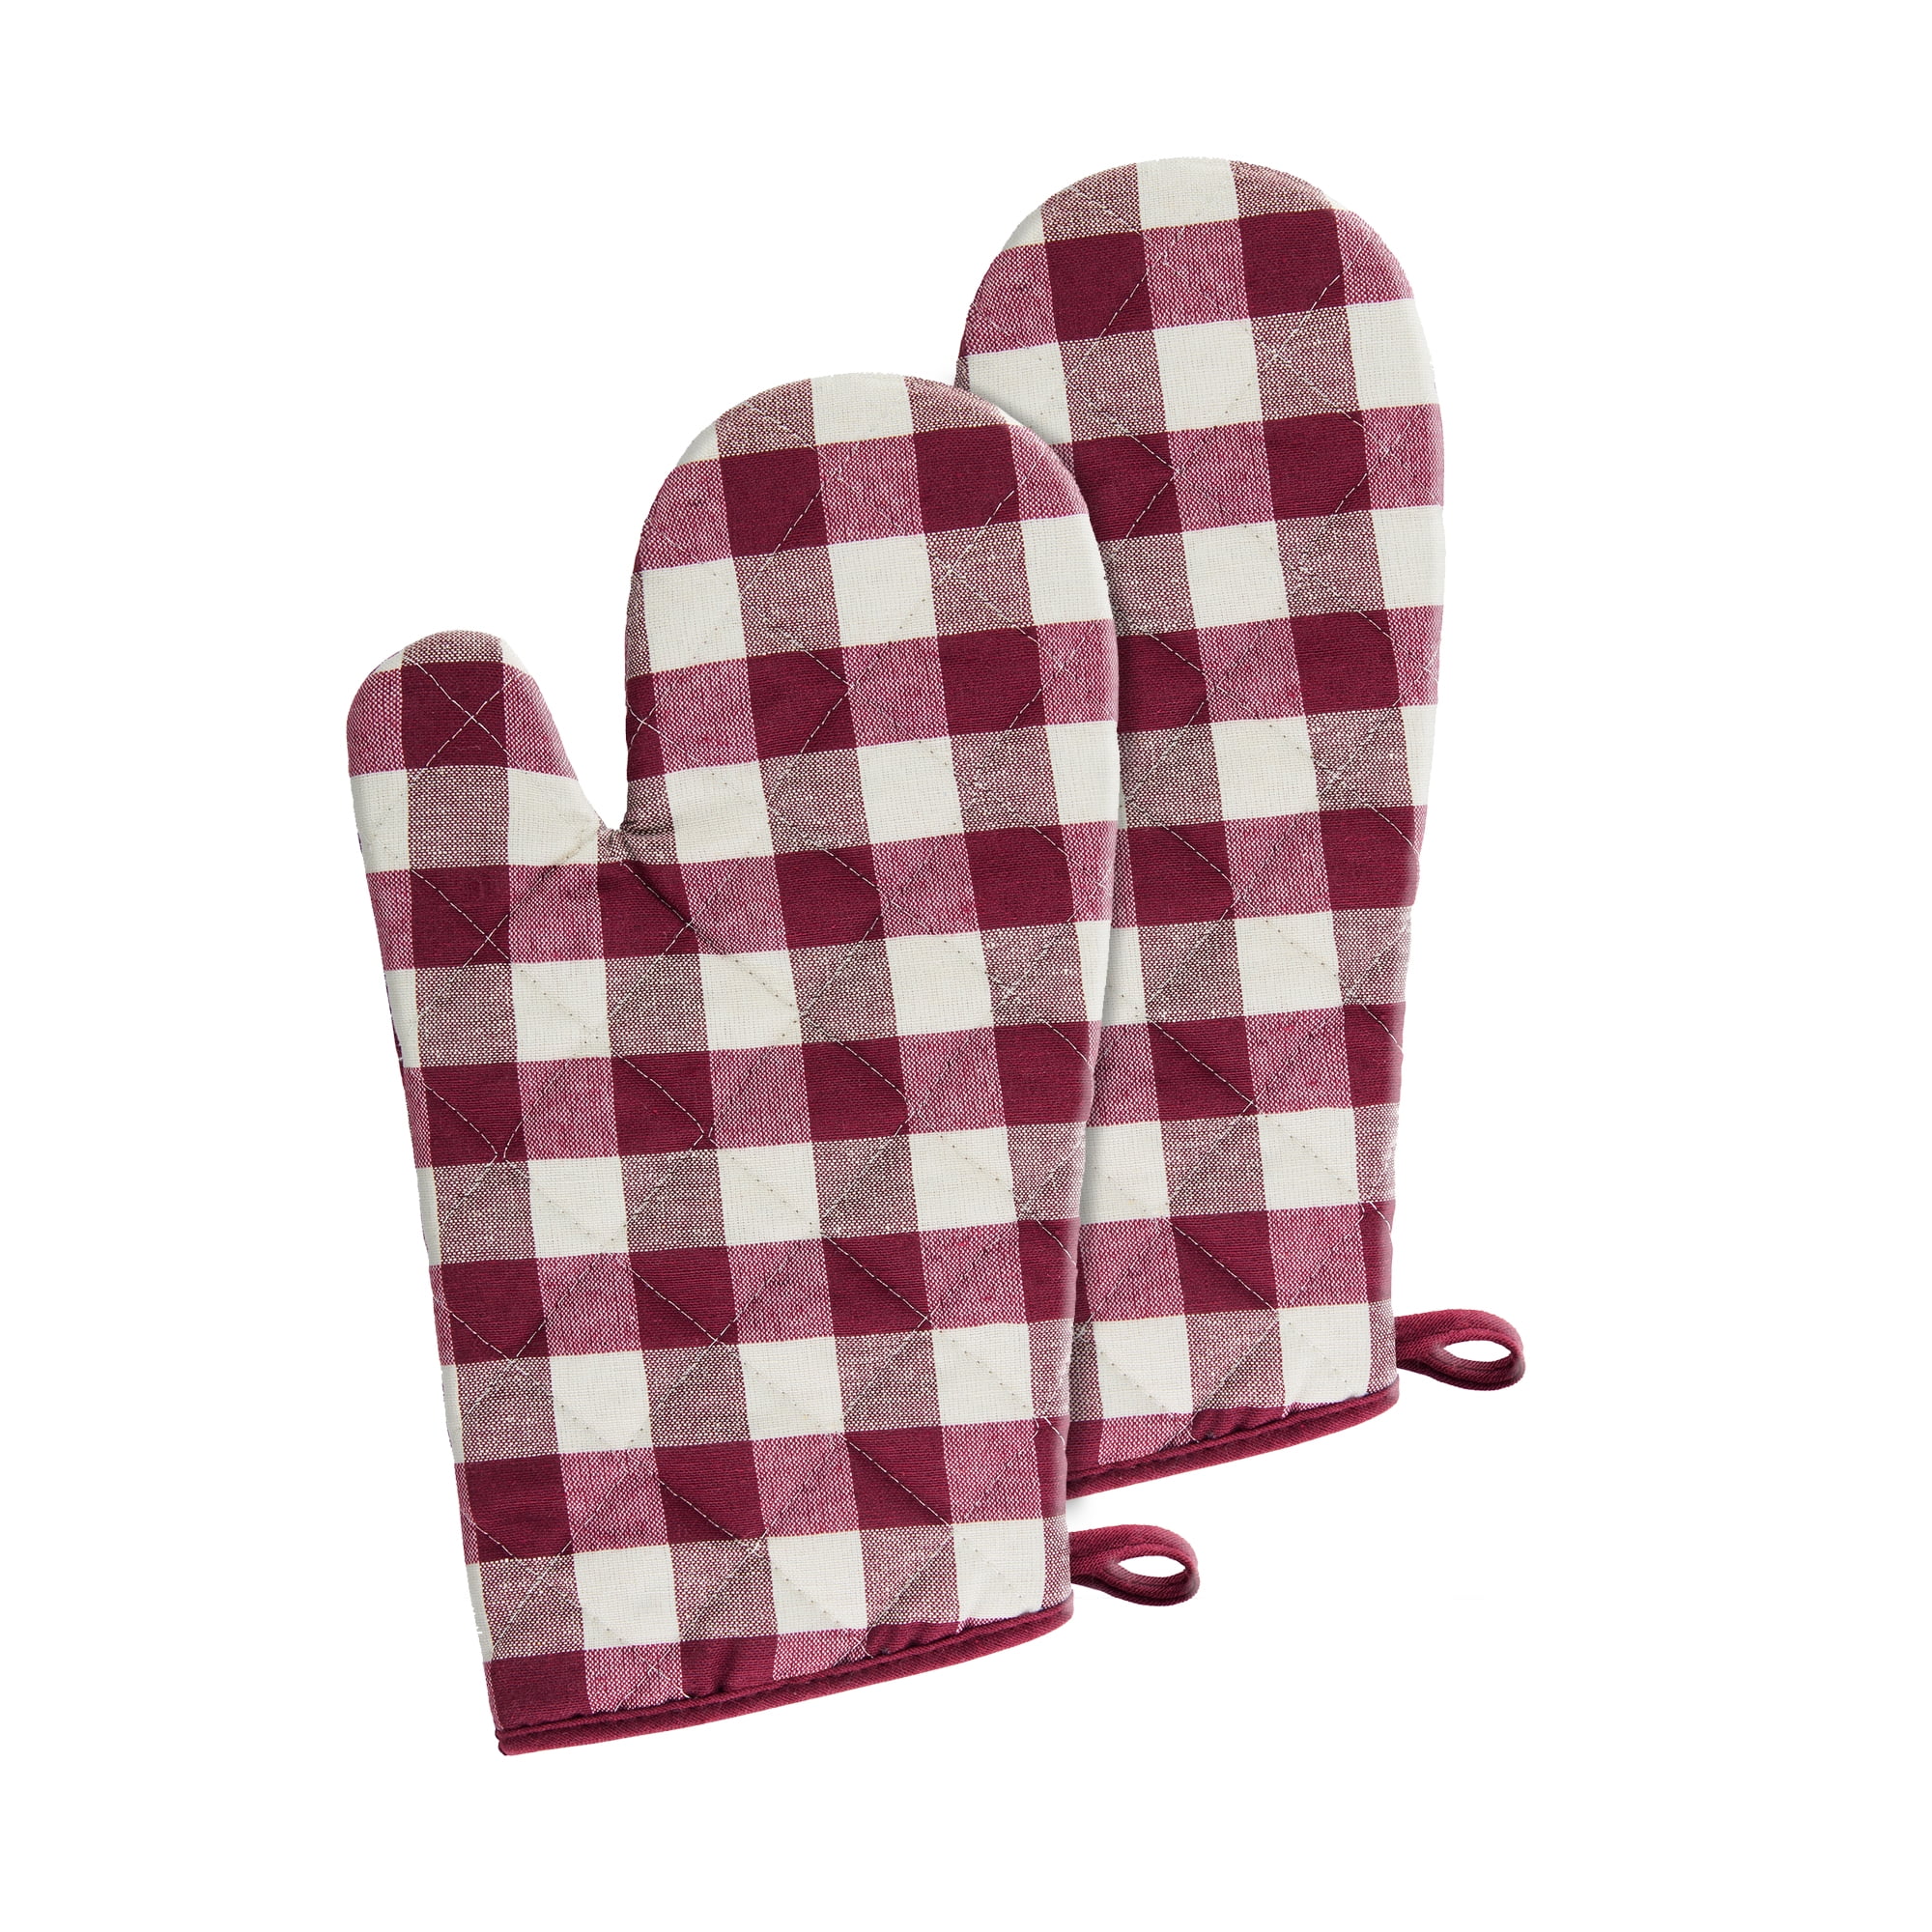 New Cotton OVEN MITT Red & Black Buffalo Plaid Lodge Rustic Country pot holder 